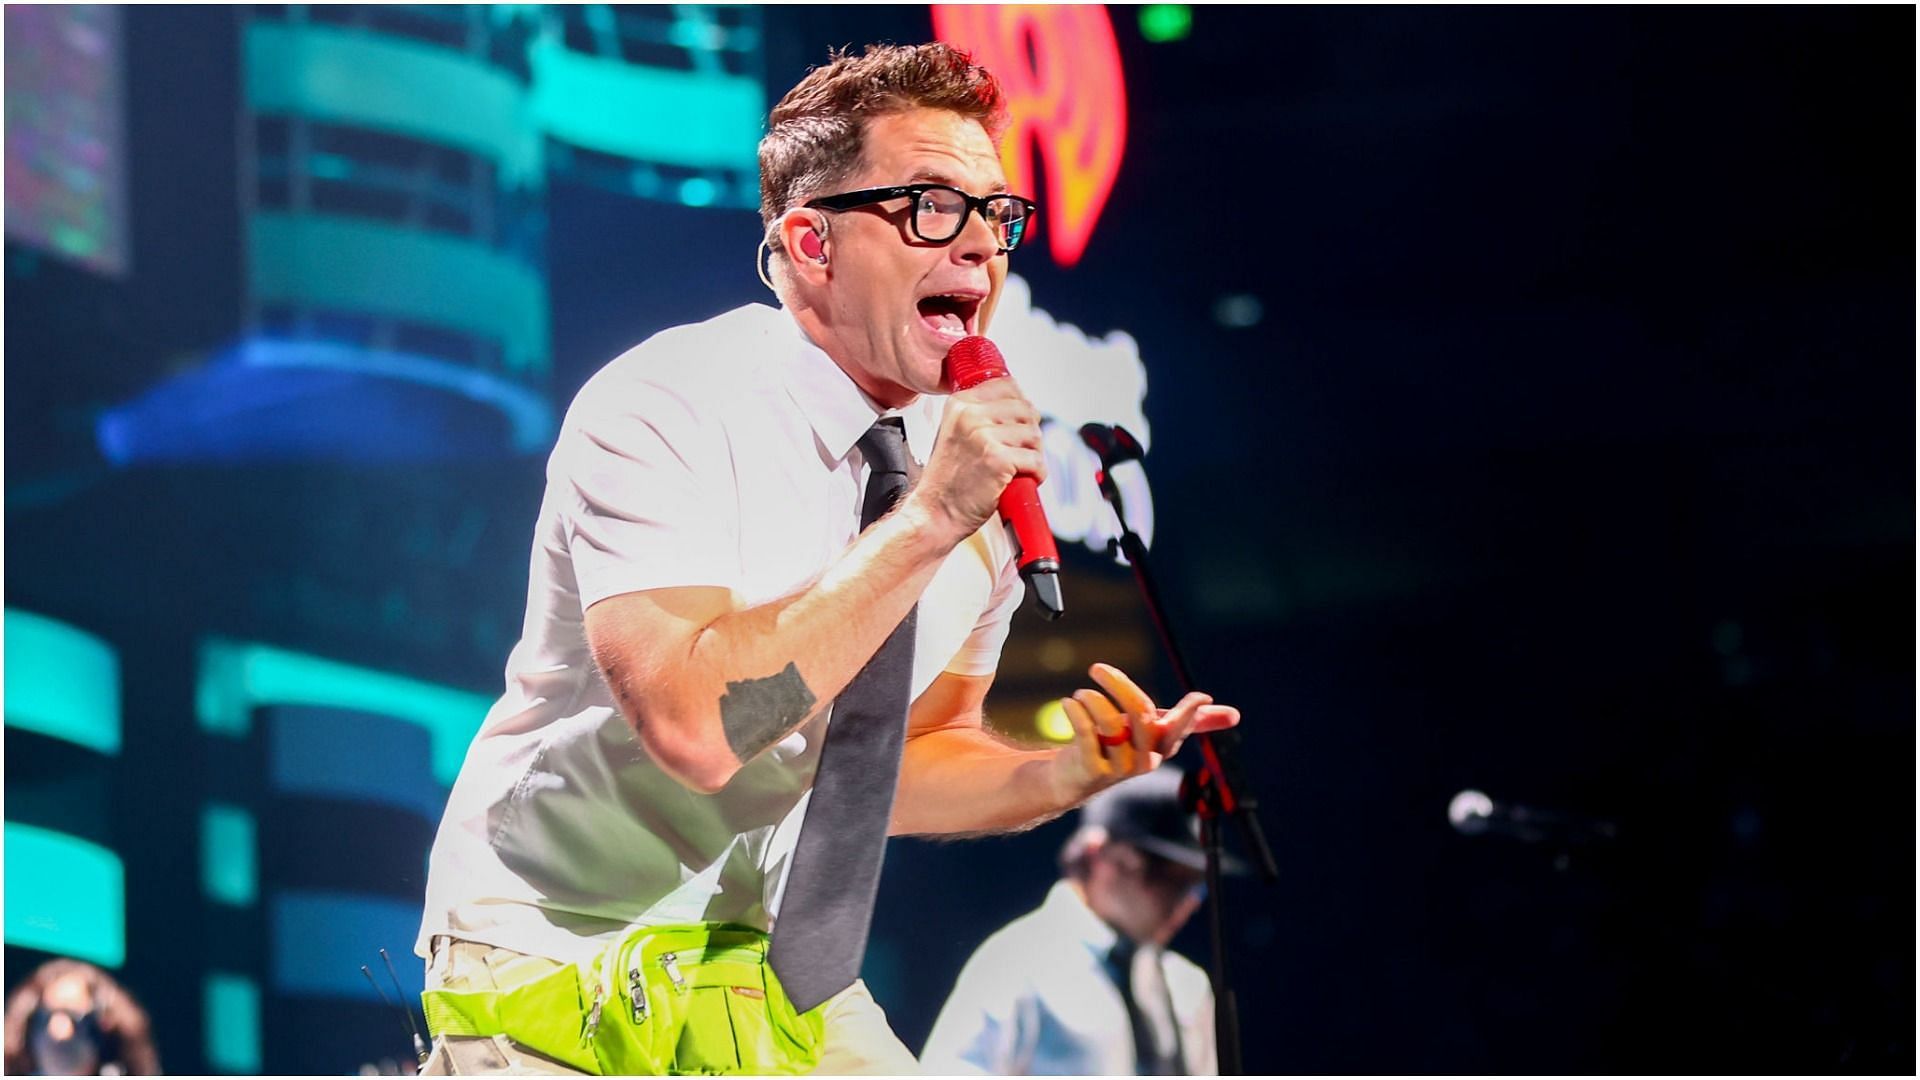 Bobby Bones has signed a contract for another show (Image via Matt Winkelmeyer/Getty Images)